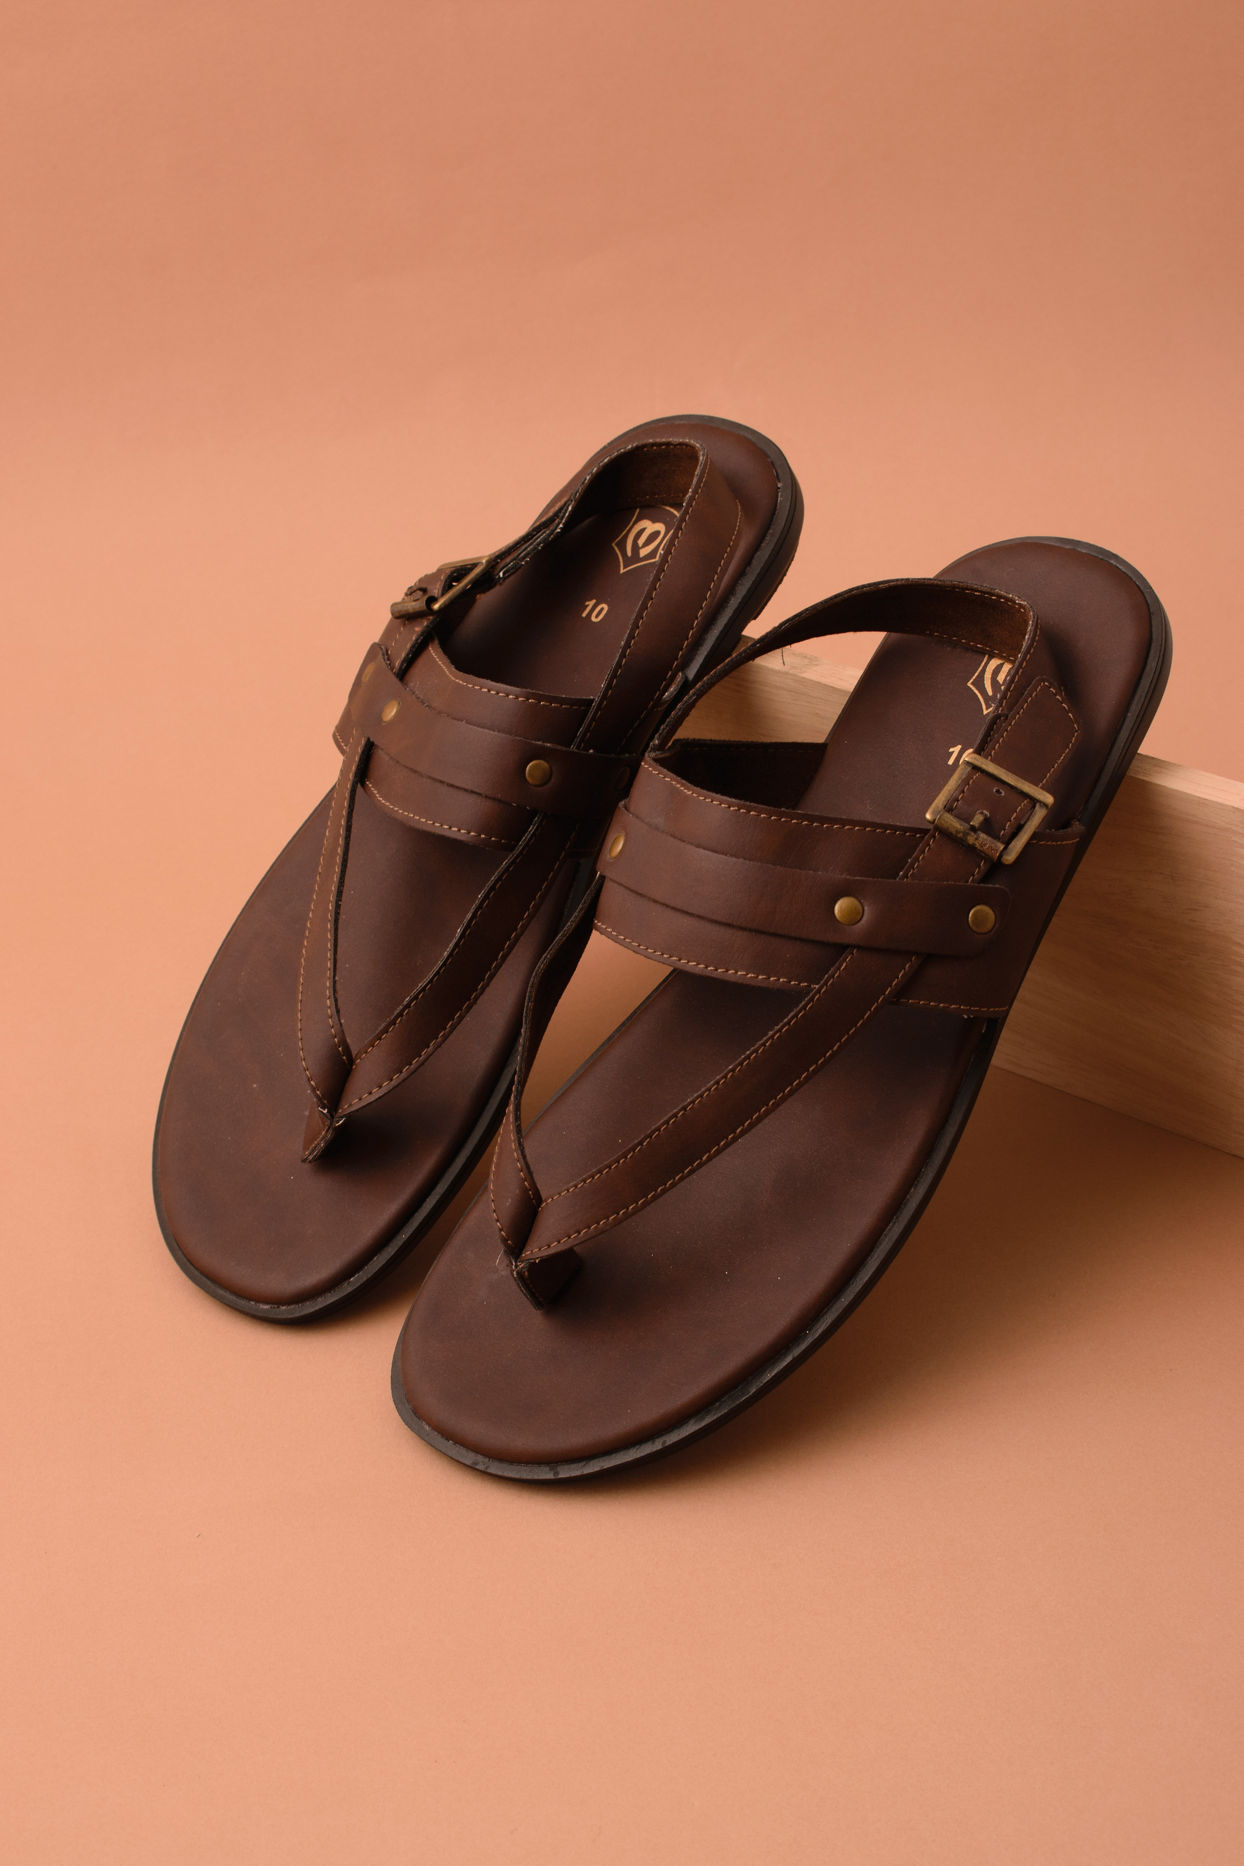 Deep Mahogany Brown Ethnic Sandals image number 4